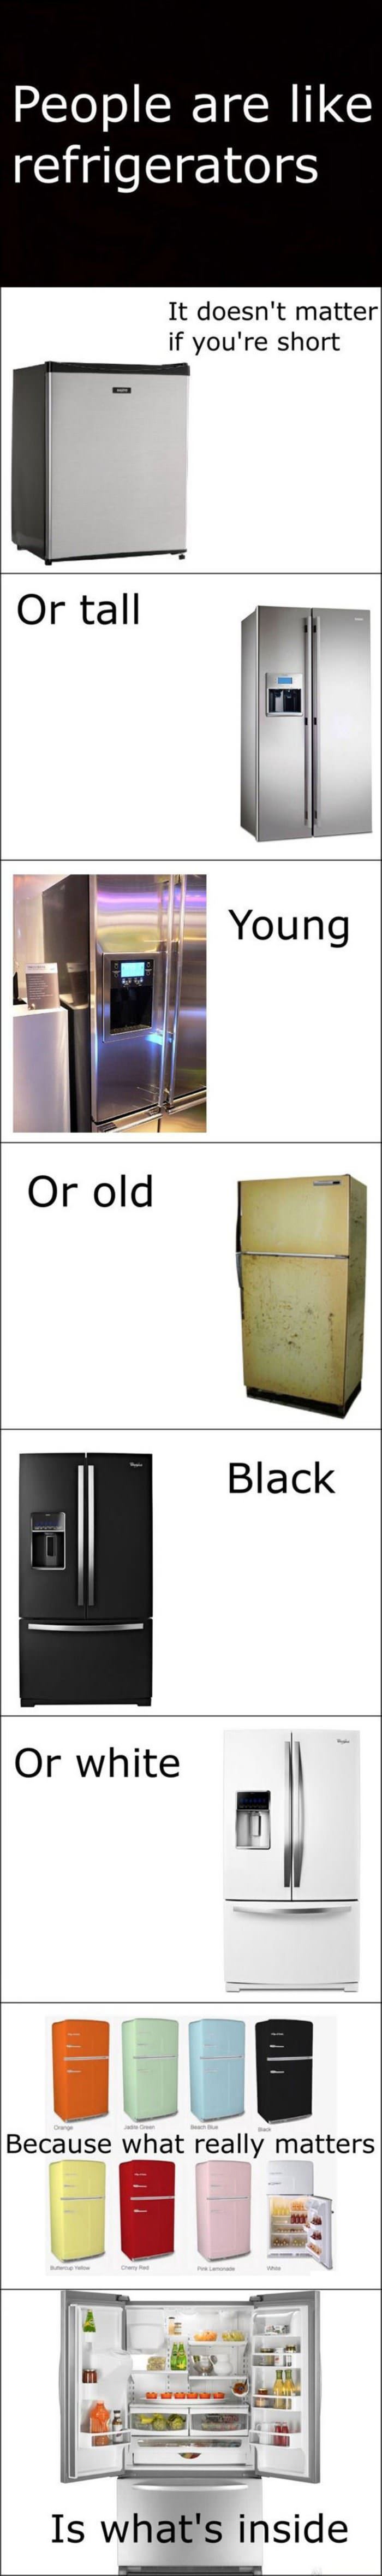 people are like a fridge funny picture